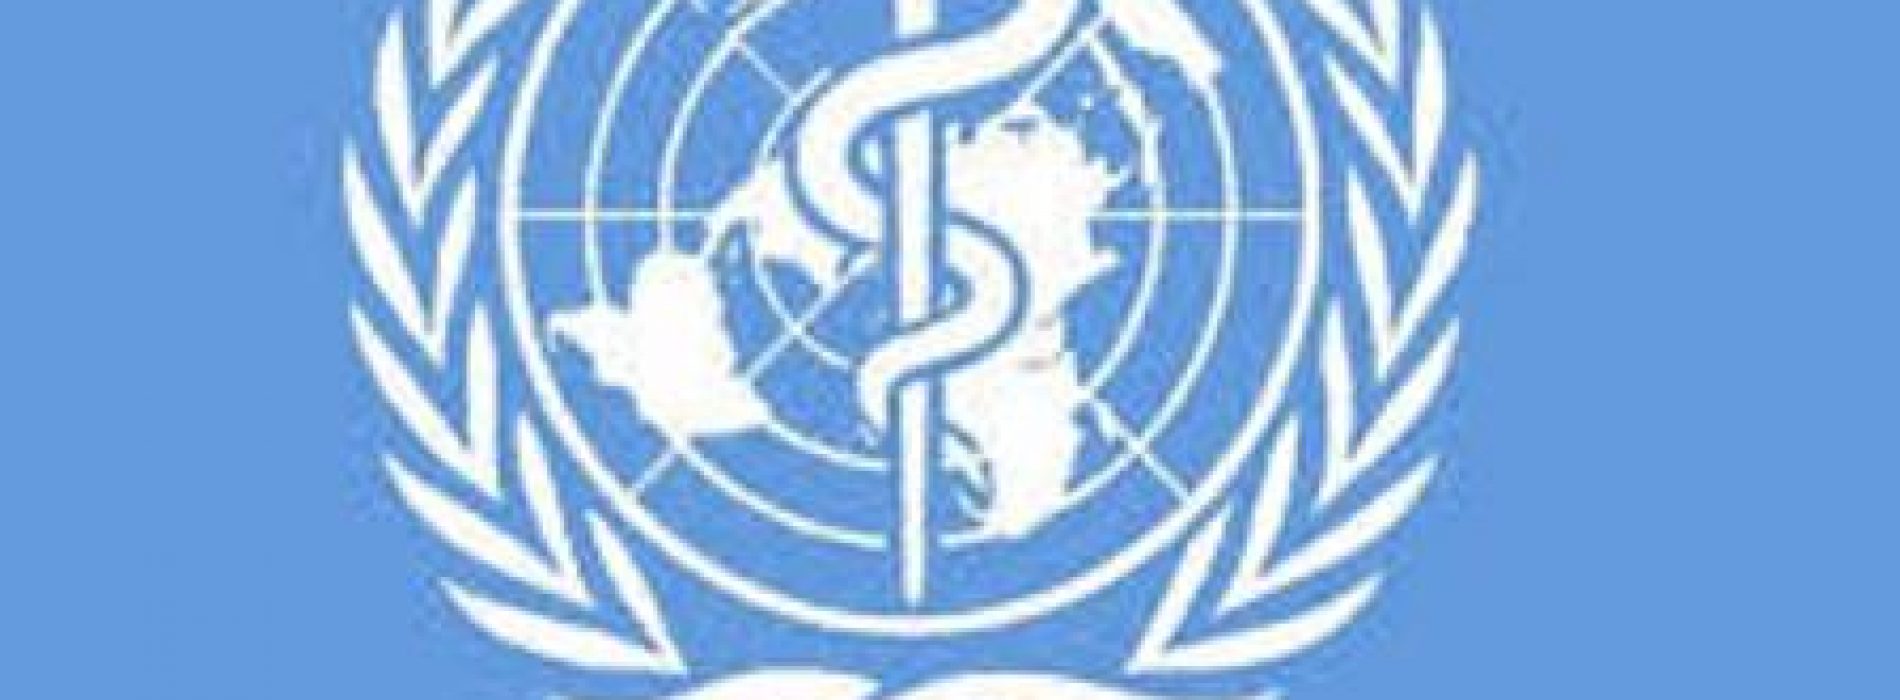 WHO estimates cost of reaching global health targets by 2030